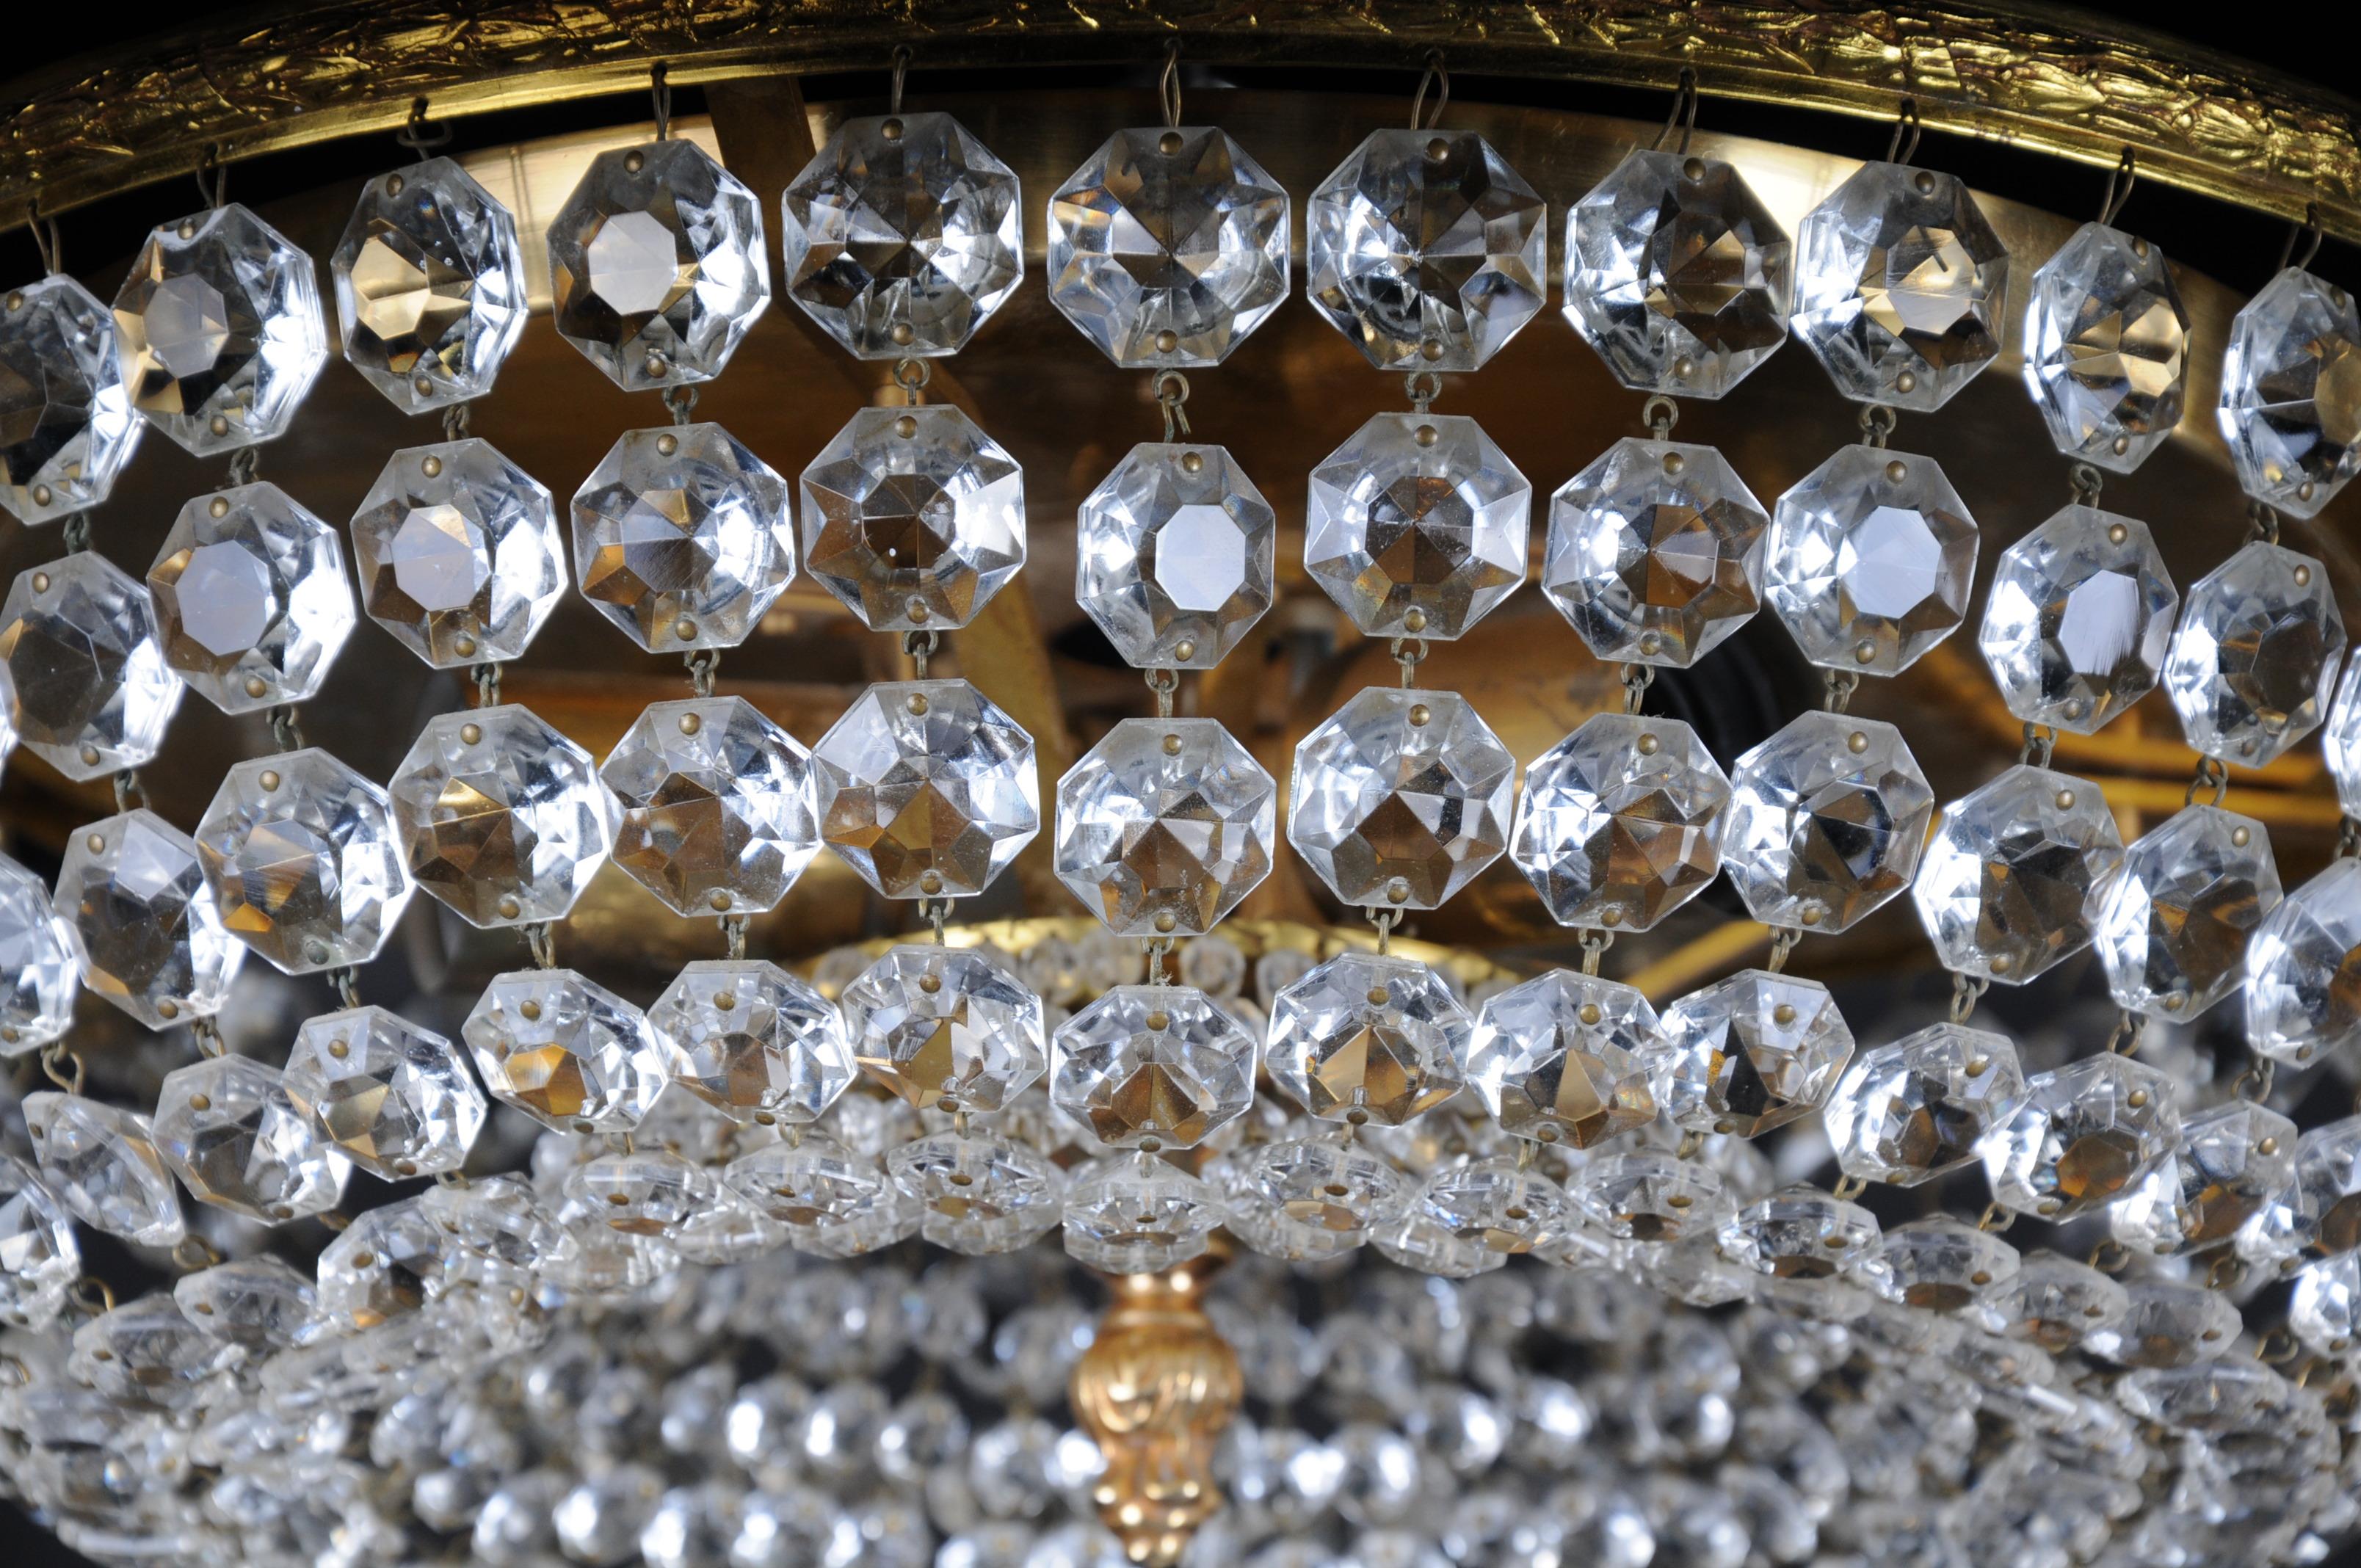 Classic, round ceiling lamp with crystal hangings. Polished brass plate. Extremely high quality workmanship.

(F-101).